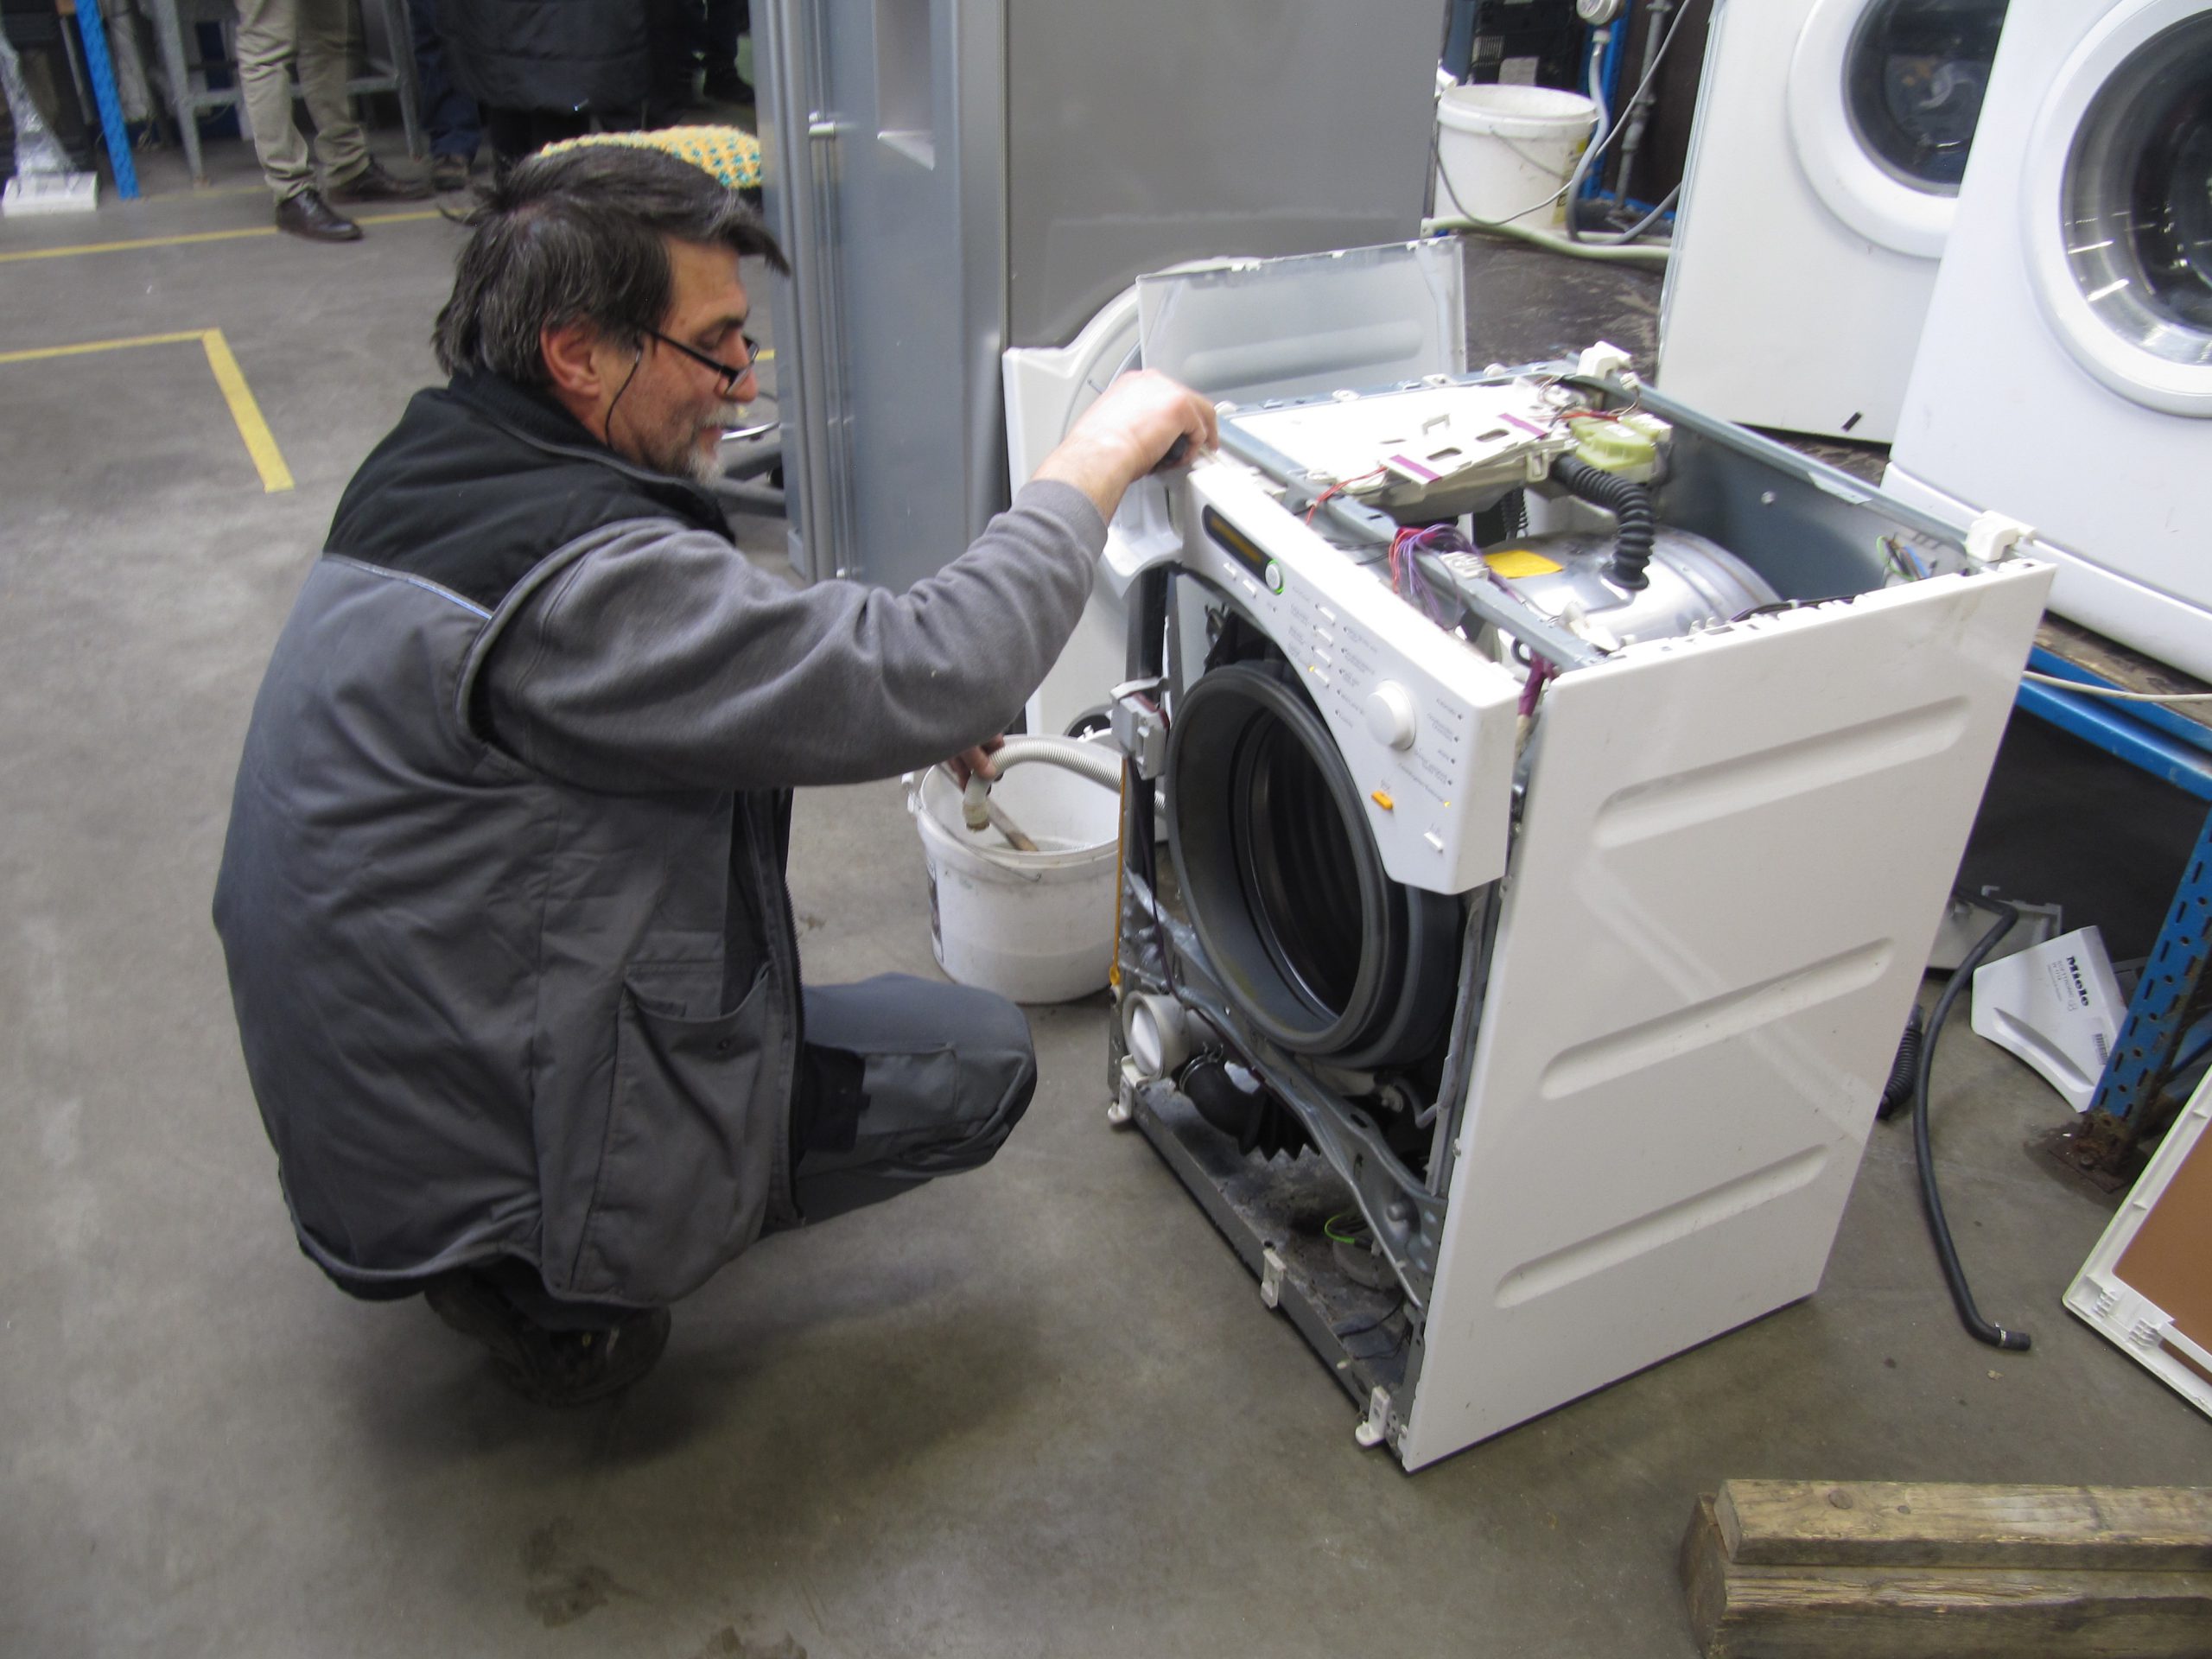 Commission report proposes measures for longer-lasting washing machines and dishwashers